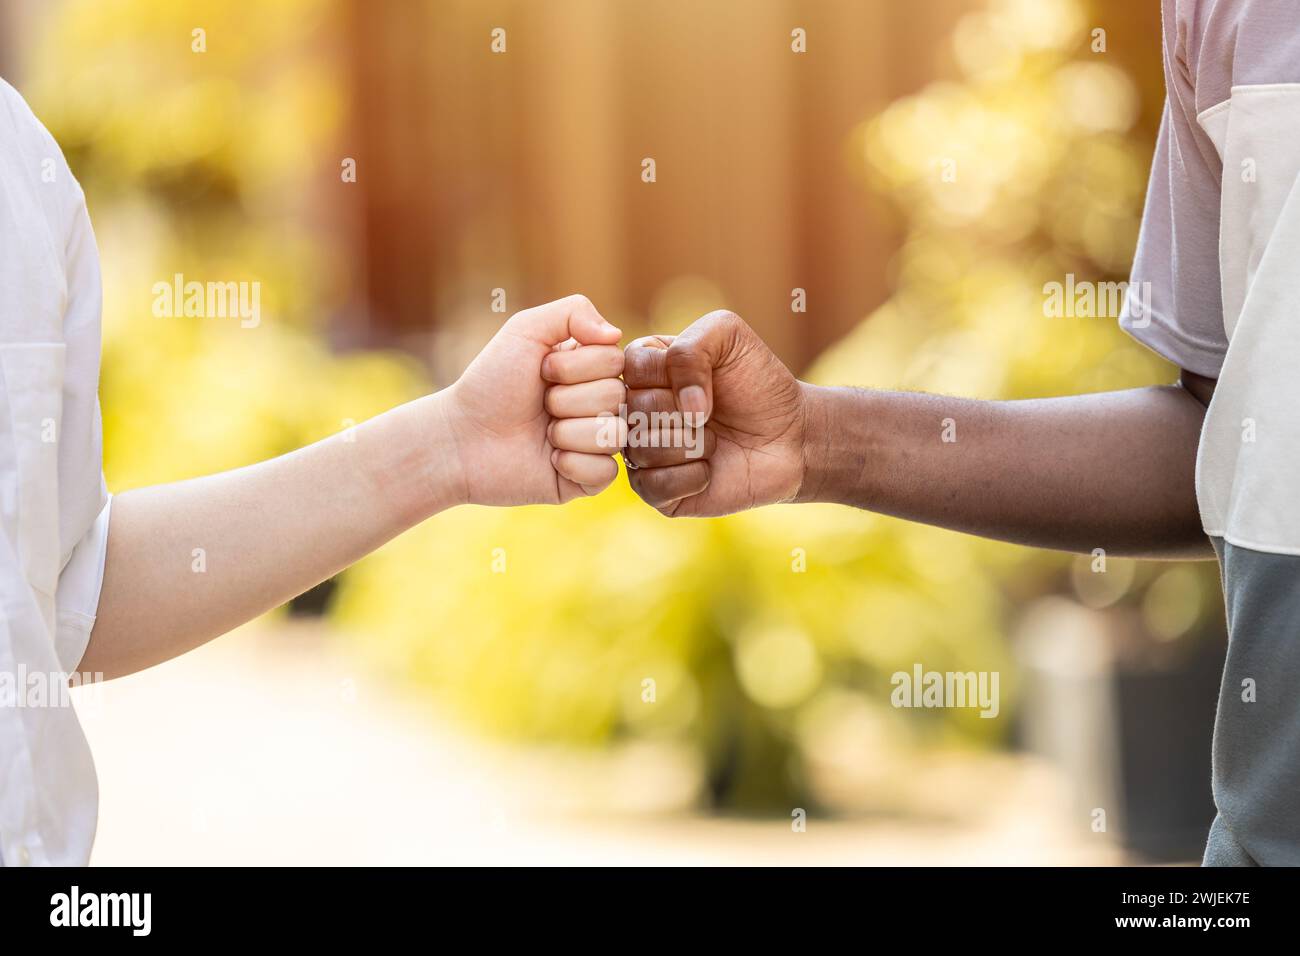 black and white people hand fist bump together to greet friends in modern teenagers. Stock Photo